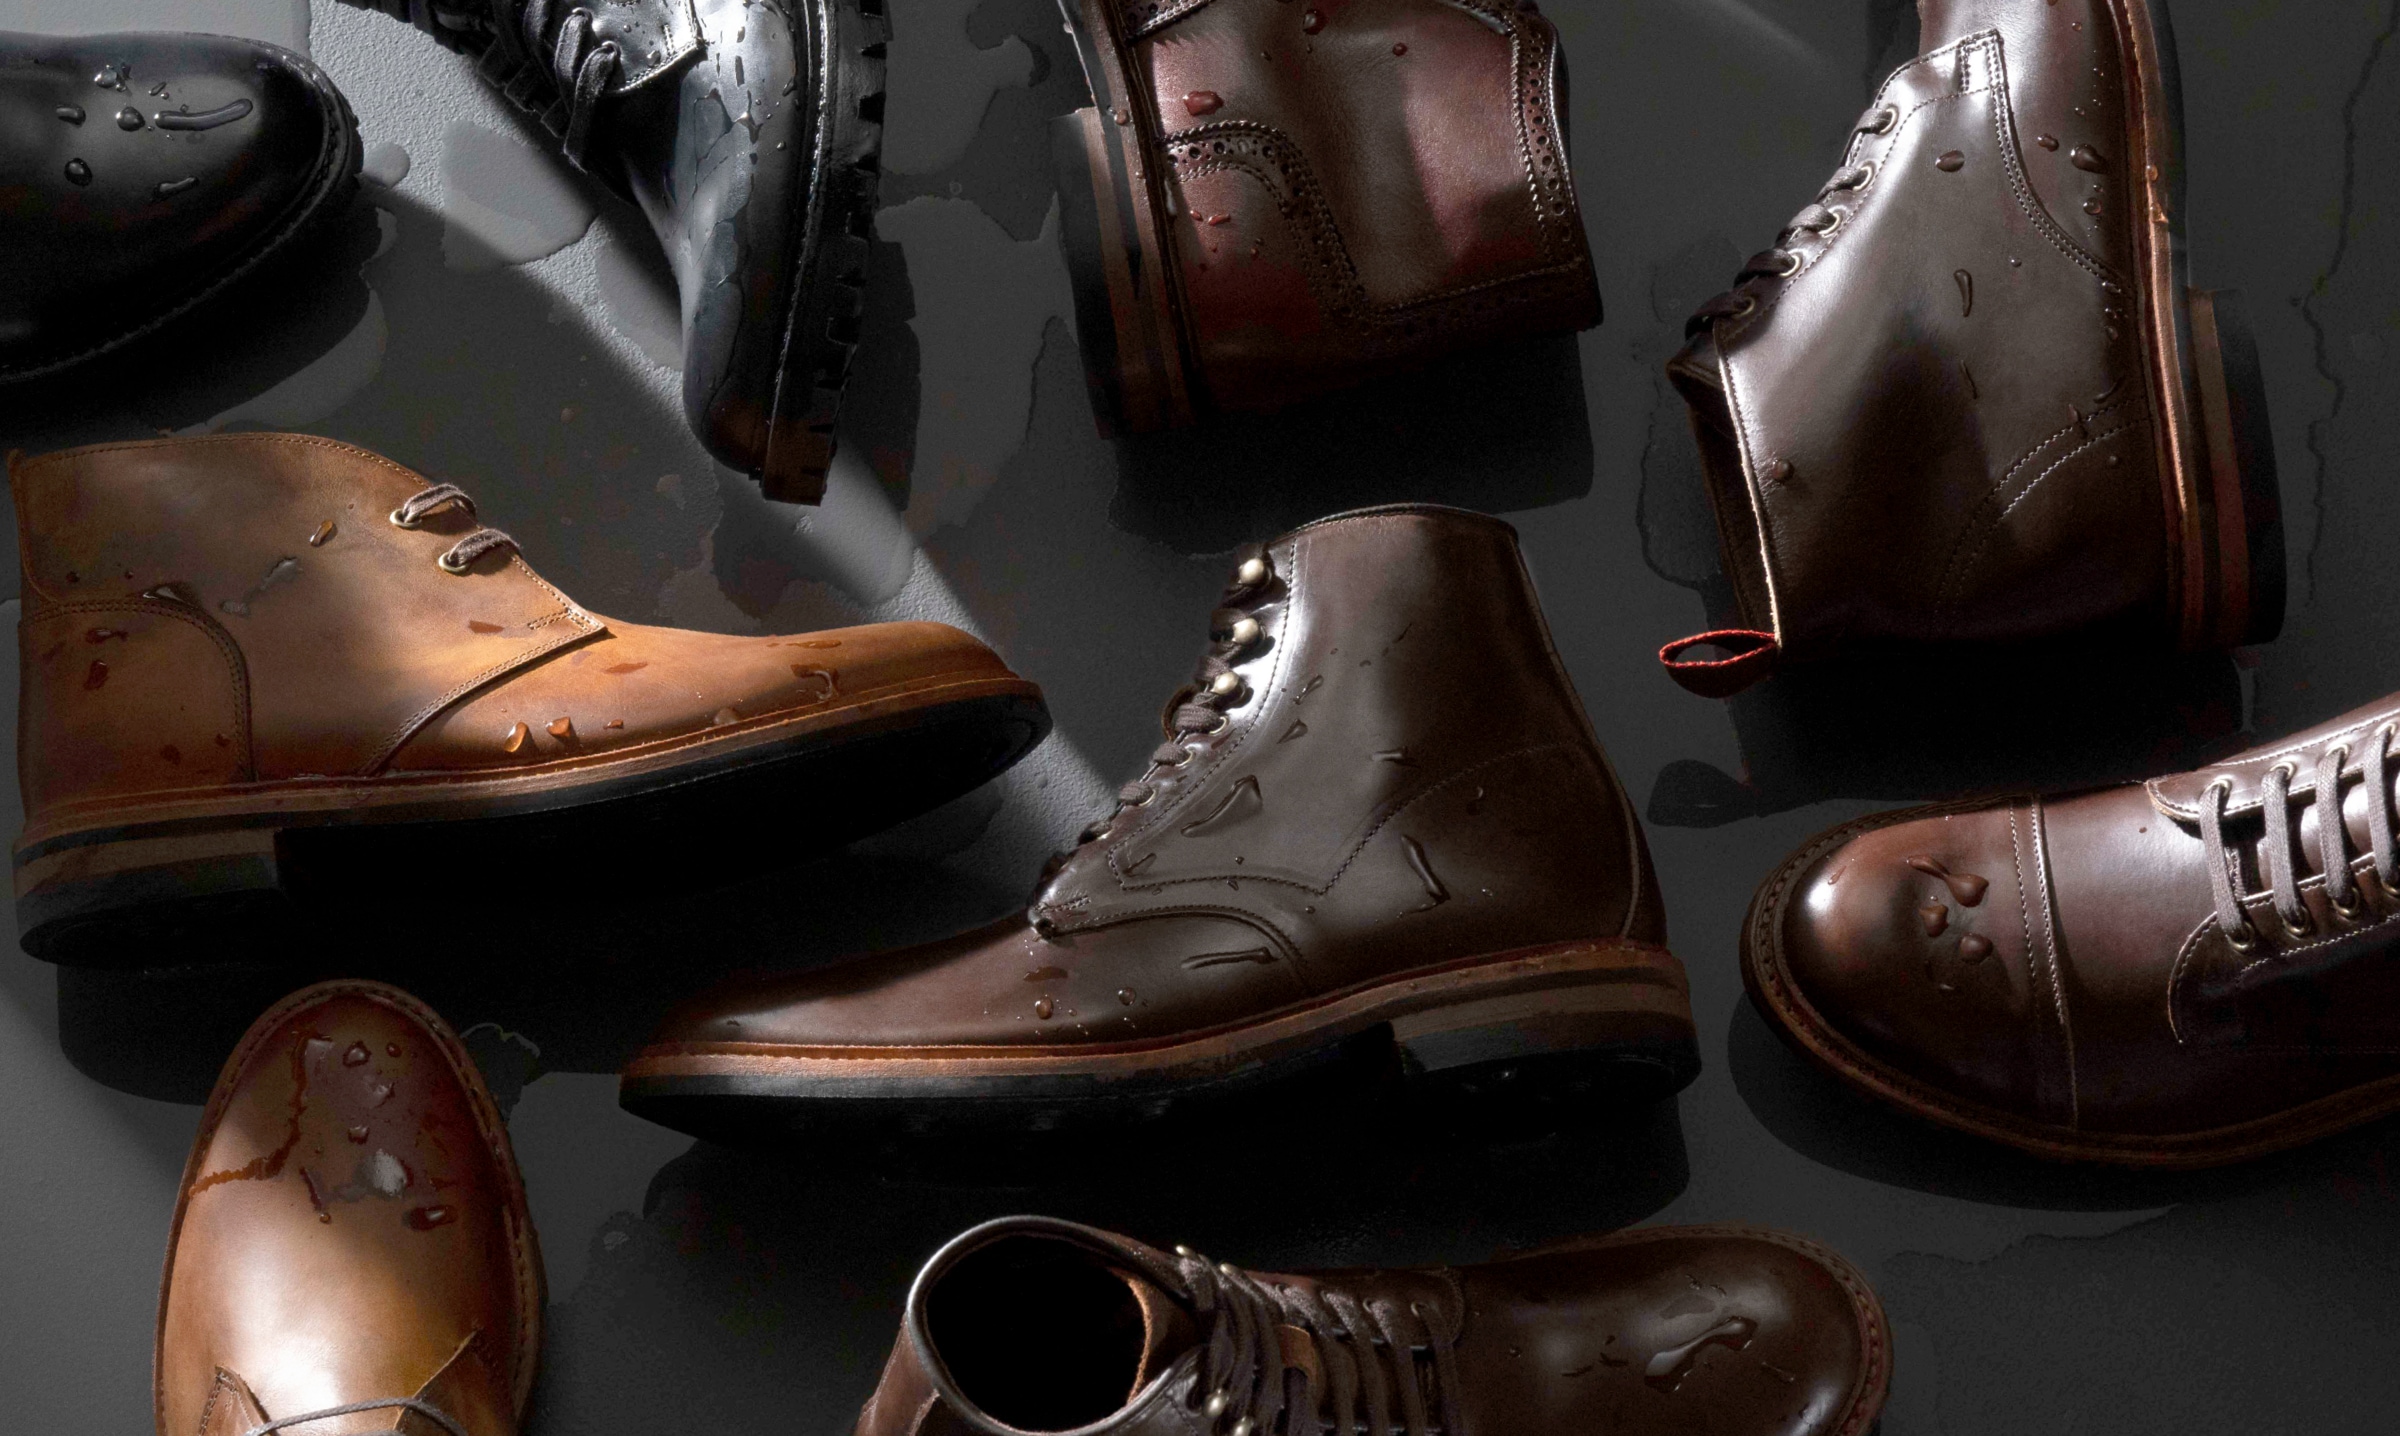 John White Shoes - Makers of Quality Men's Footwear for 100 years